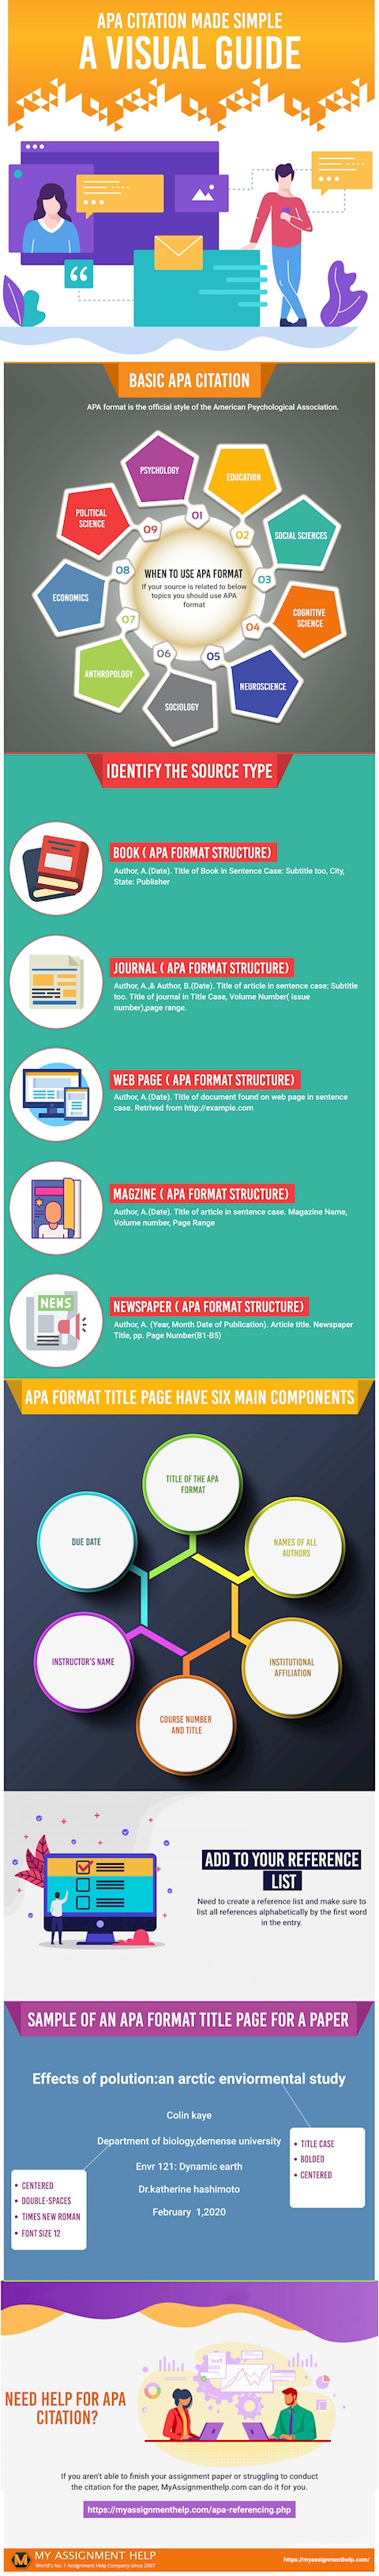 General Guidelines for APA Referencing & Citation